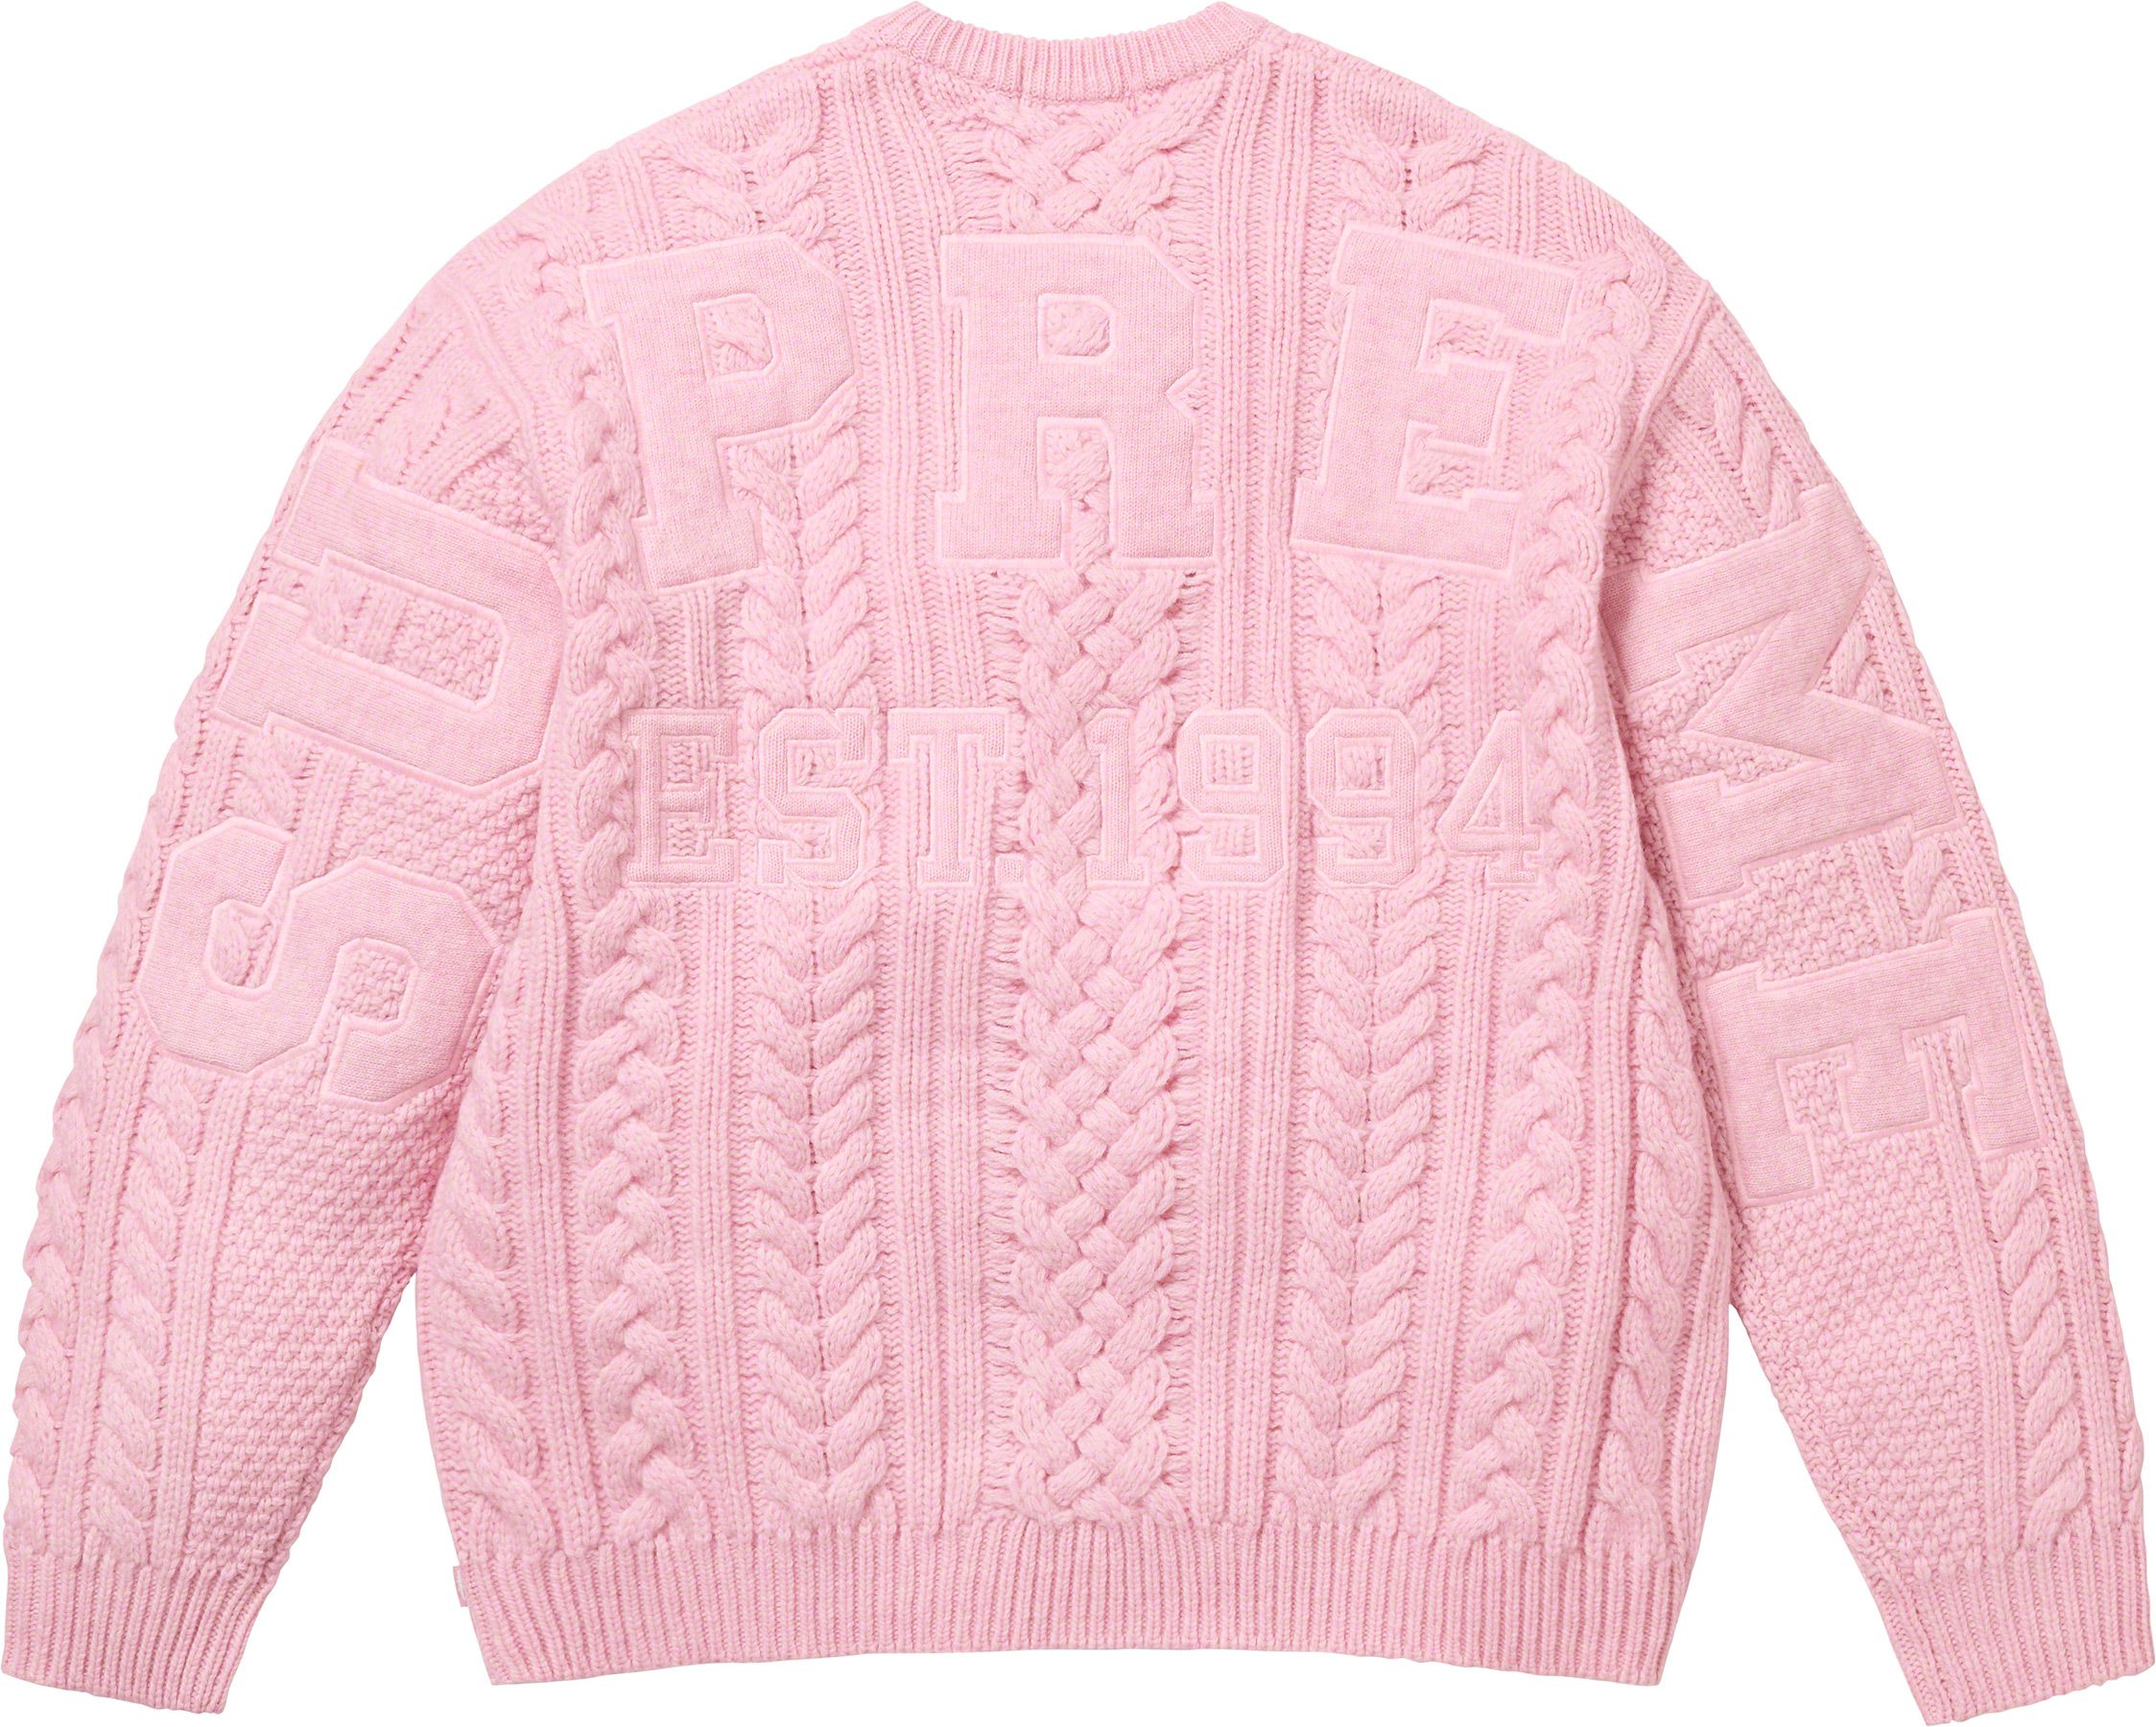 SEAL限定商品】 Knit Cable Applique Supreme Sweater 黒Ｌ トップス ...